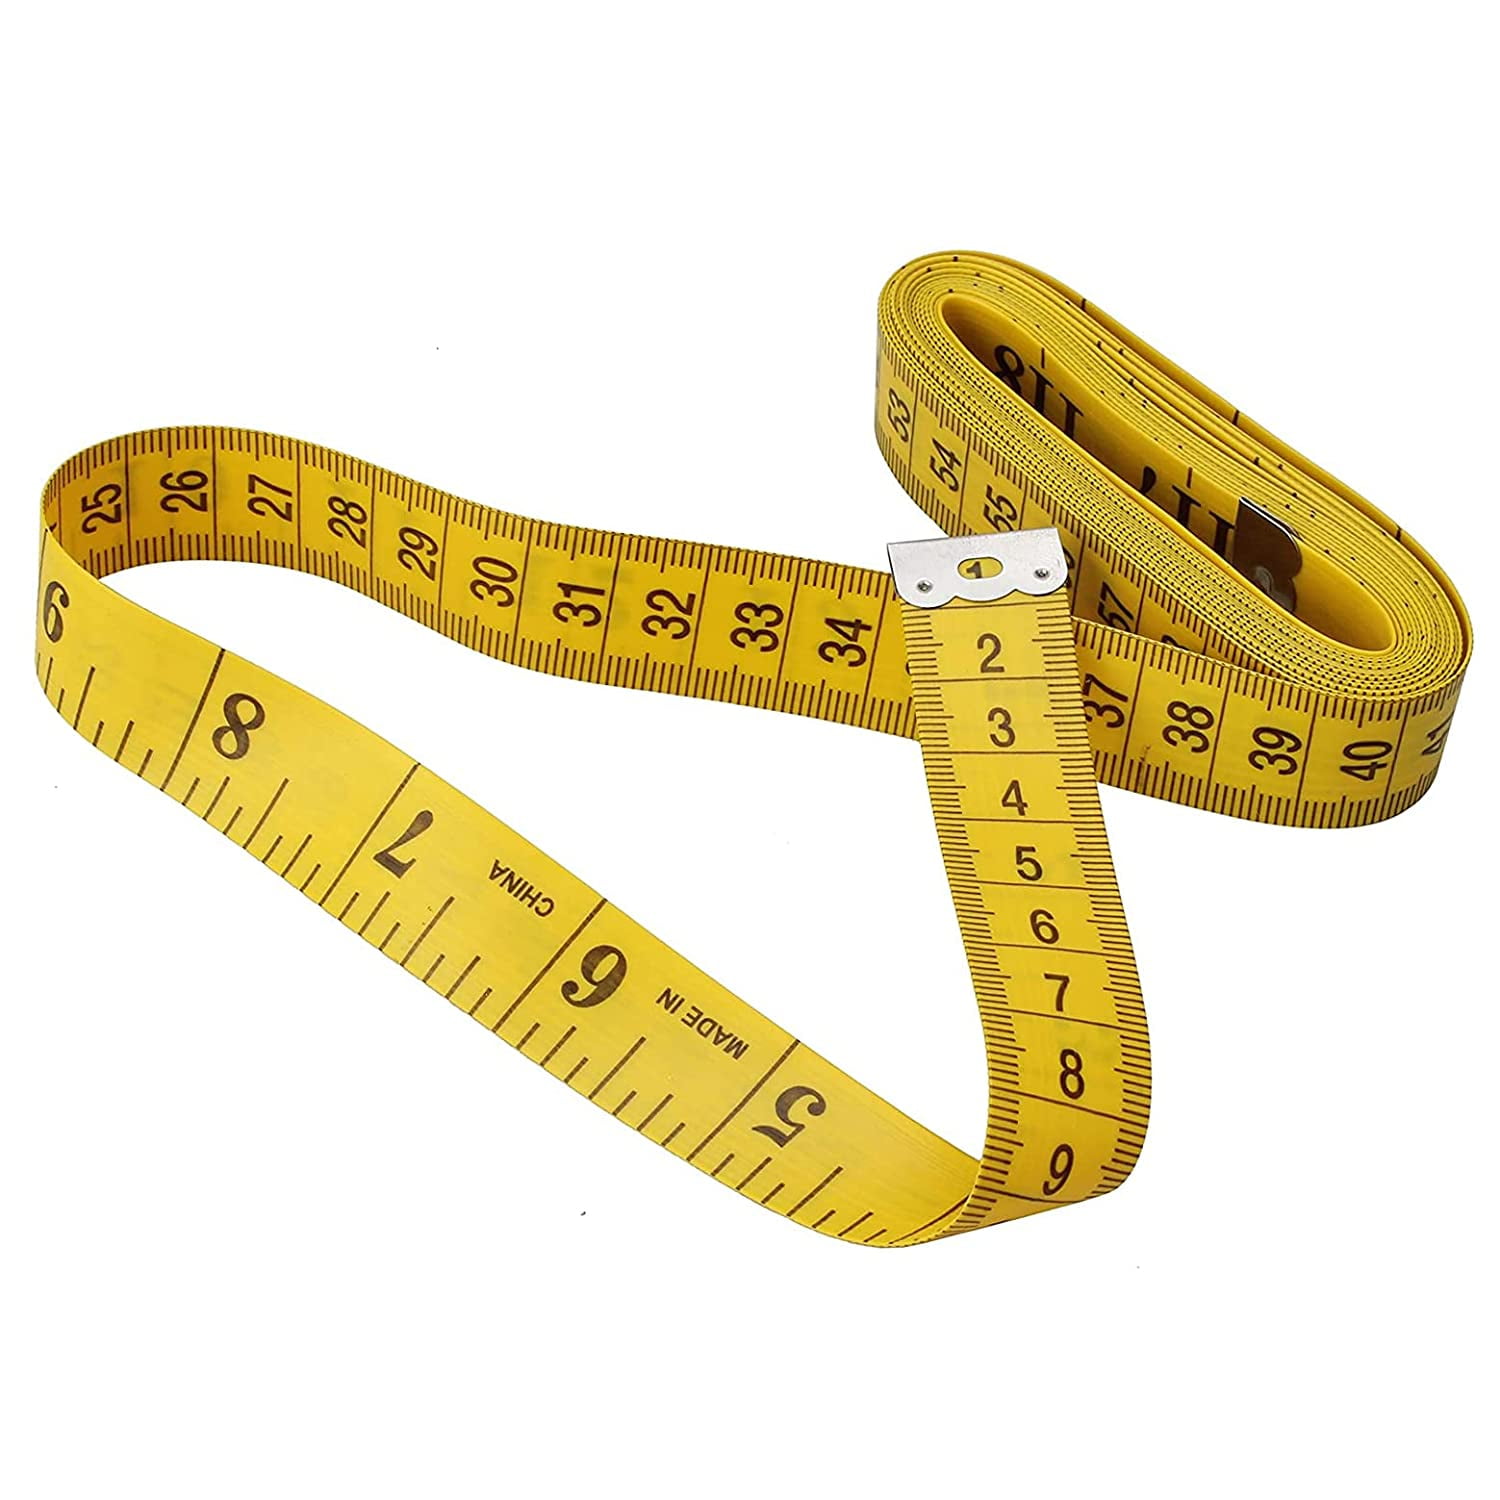 Dual Sided Body Measuring Tape, Double Scale Measuring Ruler For Tailor  Dressmaker Sewing Cloth, Soft Tape Measures Multipack For Home & Profess